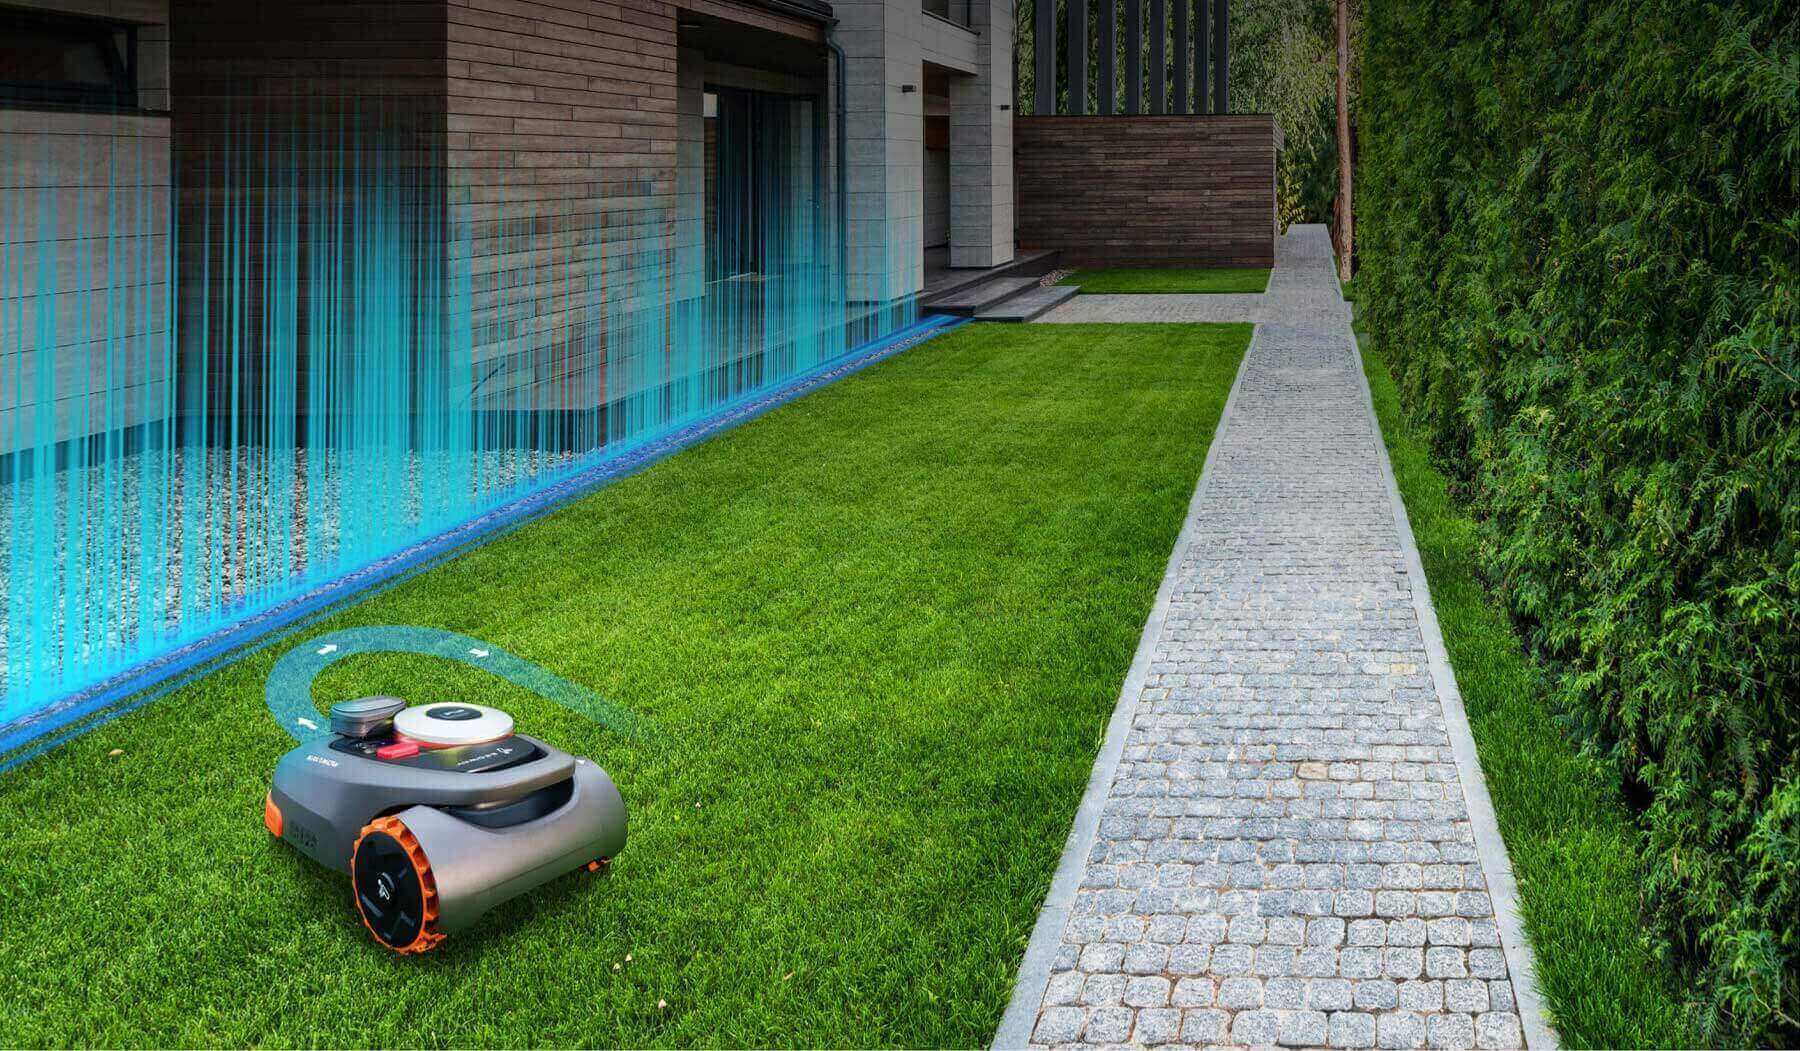 Segway adaptable to complex lawns